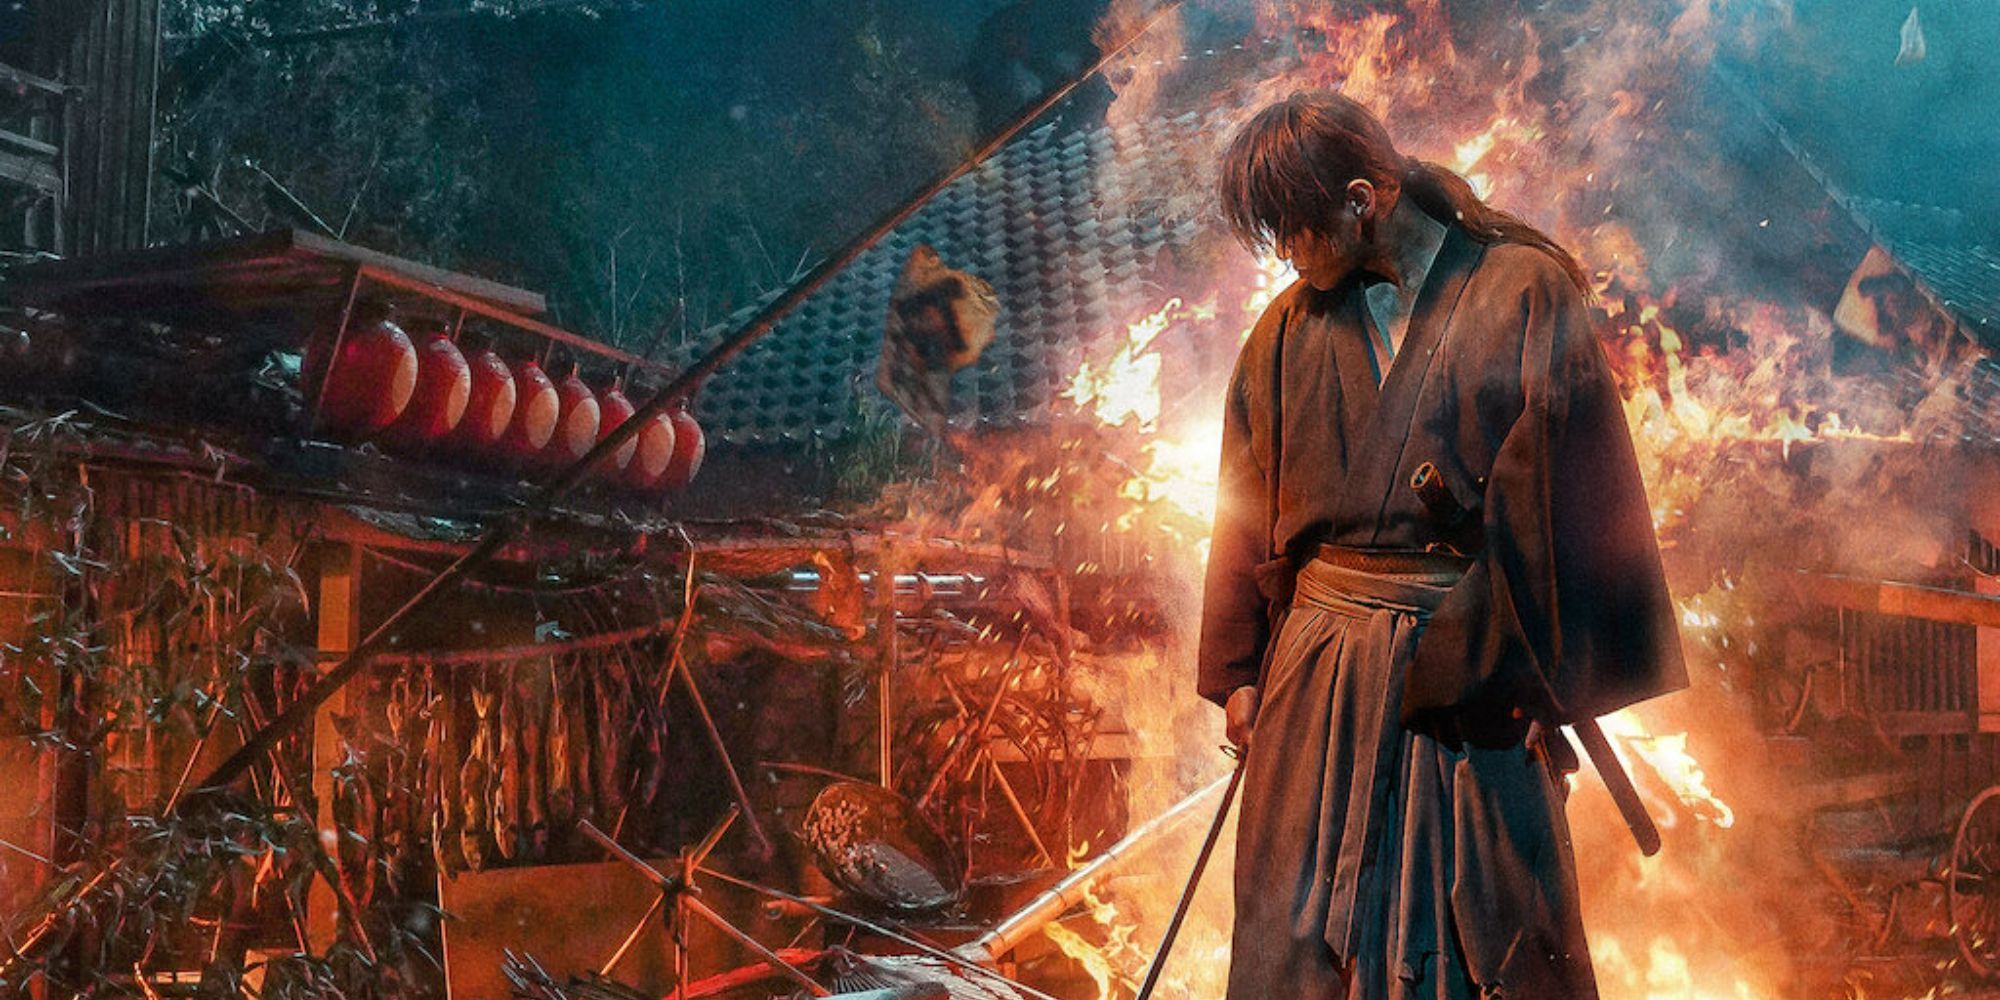 A warrior stands in front of fire and damaged houses in Rurouni Kenshin Final Chapter Part I - The Final